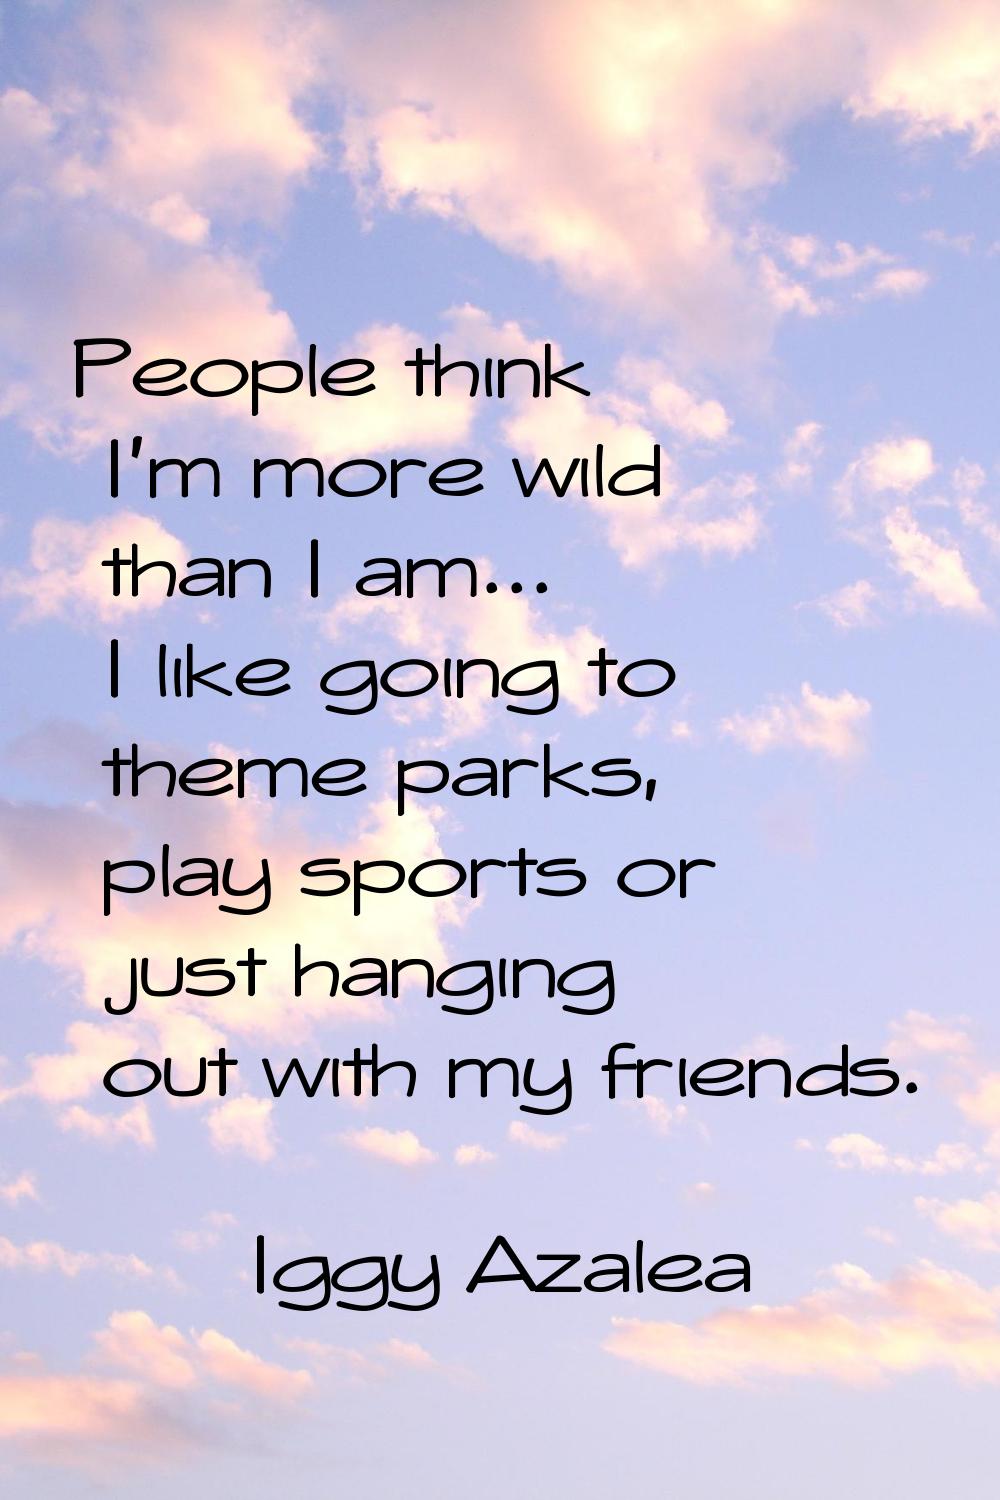 People think I'm more wild than I am... I like going to theme parks, play sports or just hanging ou